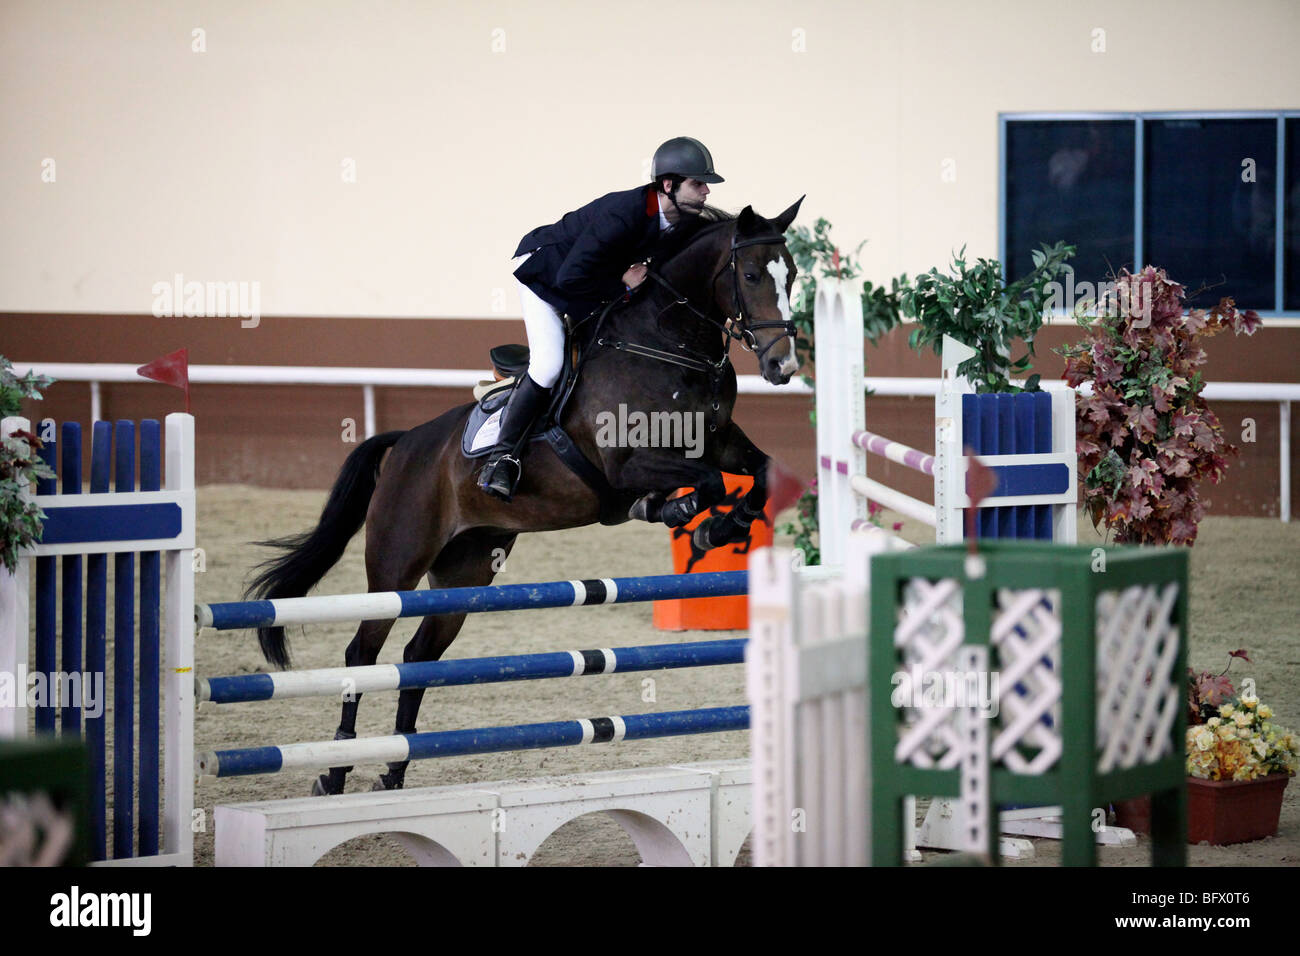 A competitor in a regional show-jumping event at the Qatar Equestrian Federation's indoor Arena in Doha Stock Photo